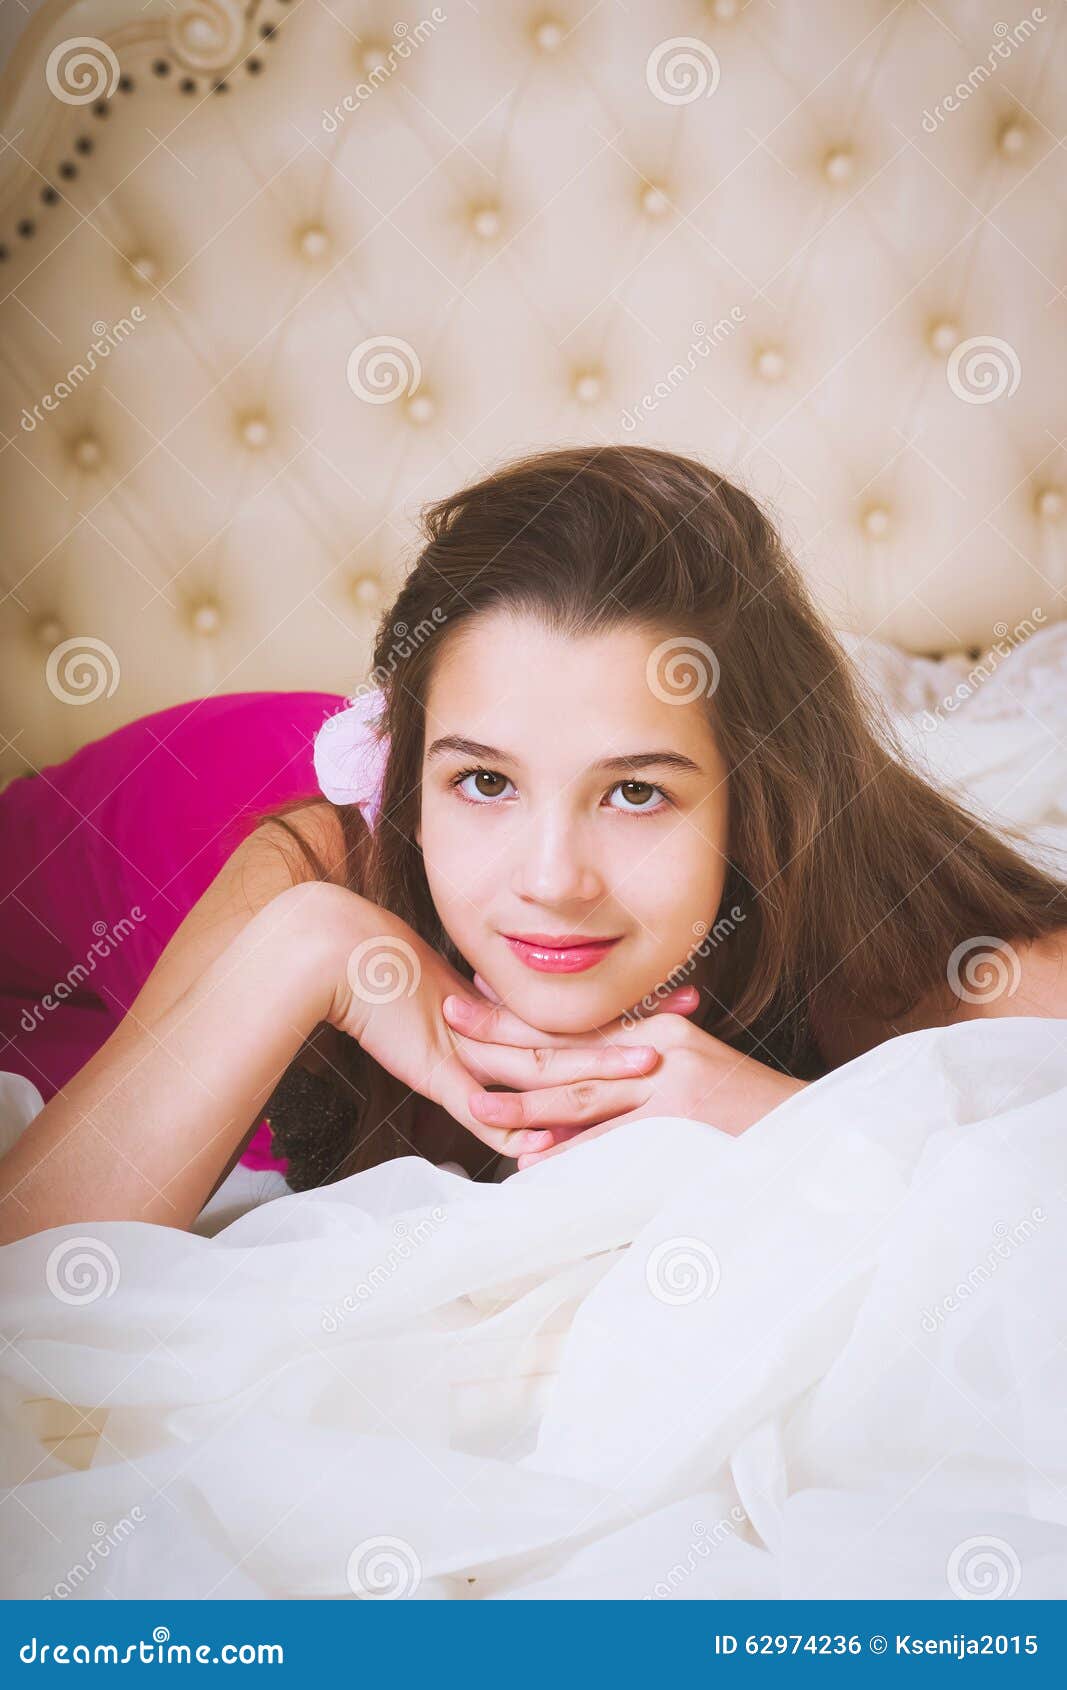 Emotional portrait of a young european girl with pure and 